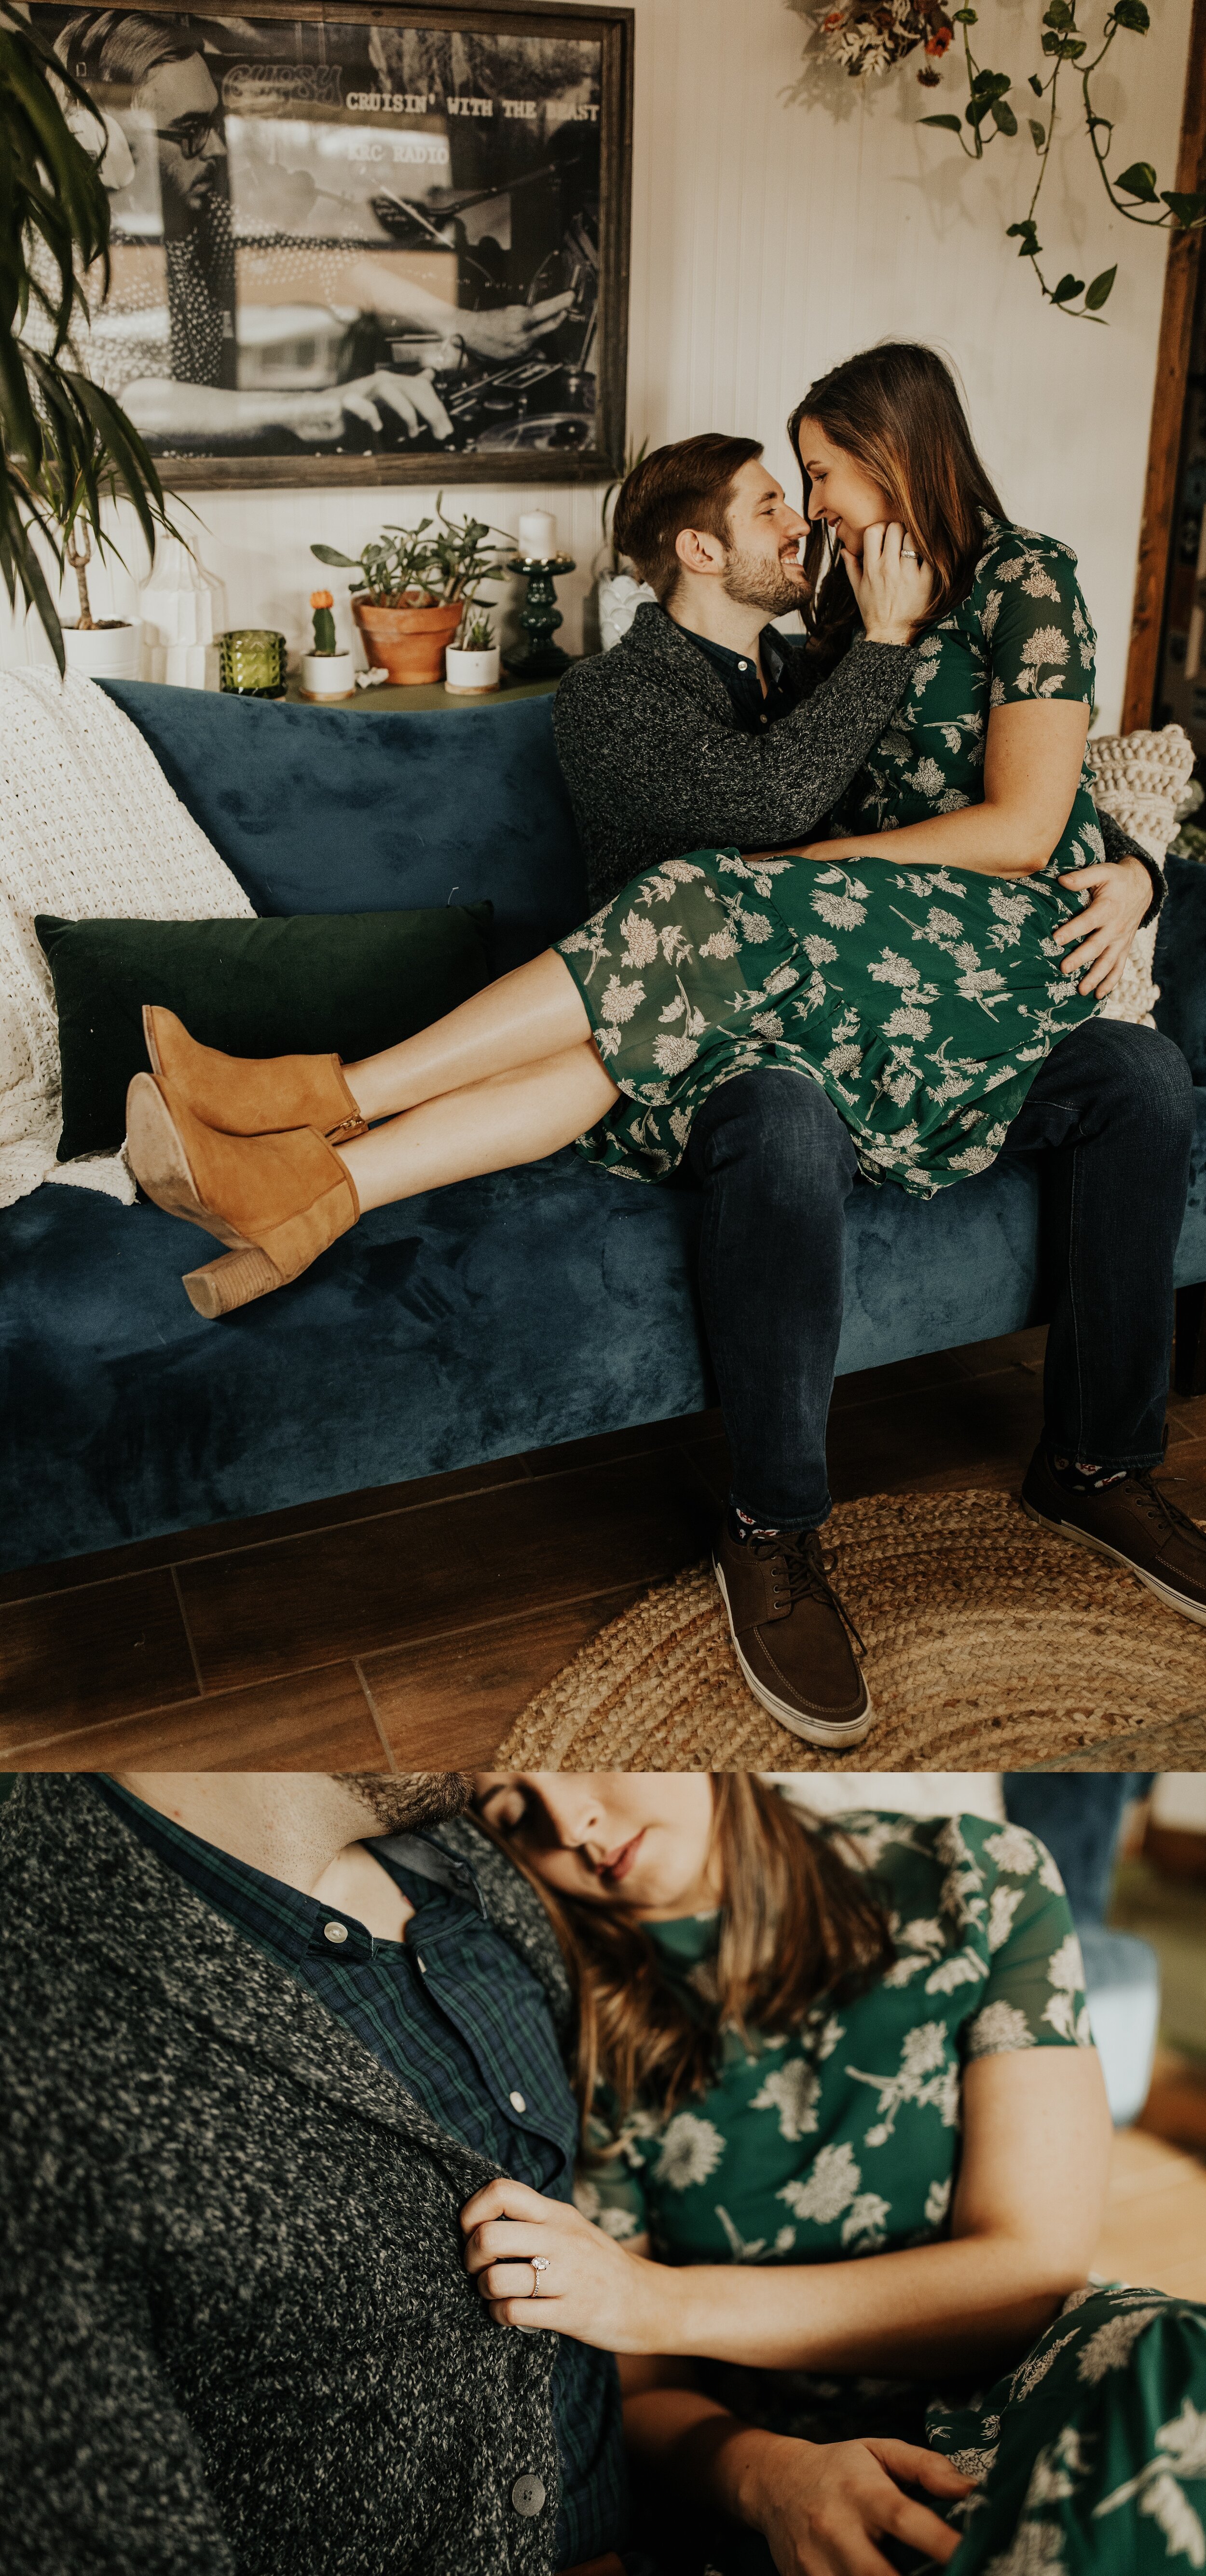 jessika-christine-photography-in+home-engagement-couples-cozy-adventurous-session (14).jpg